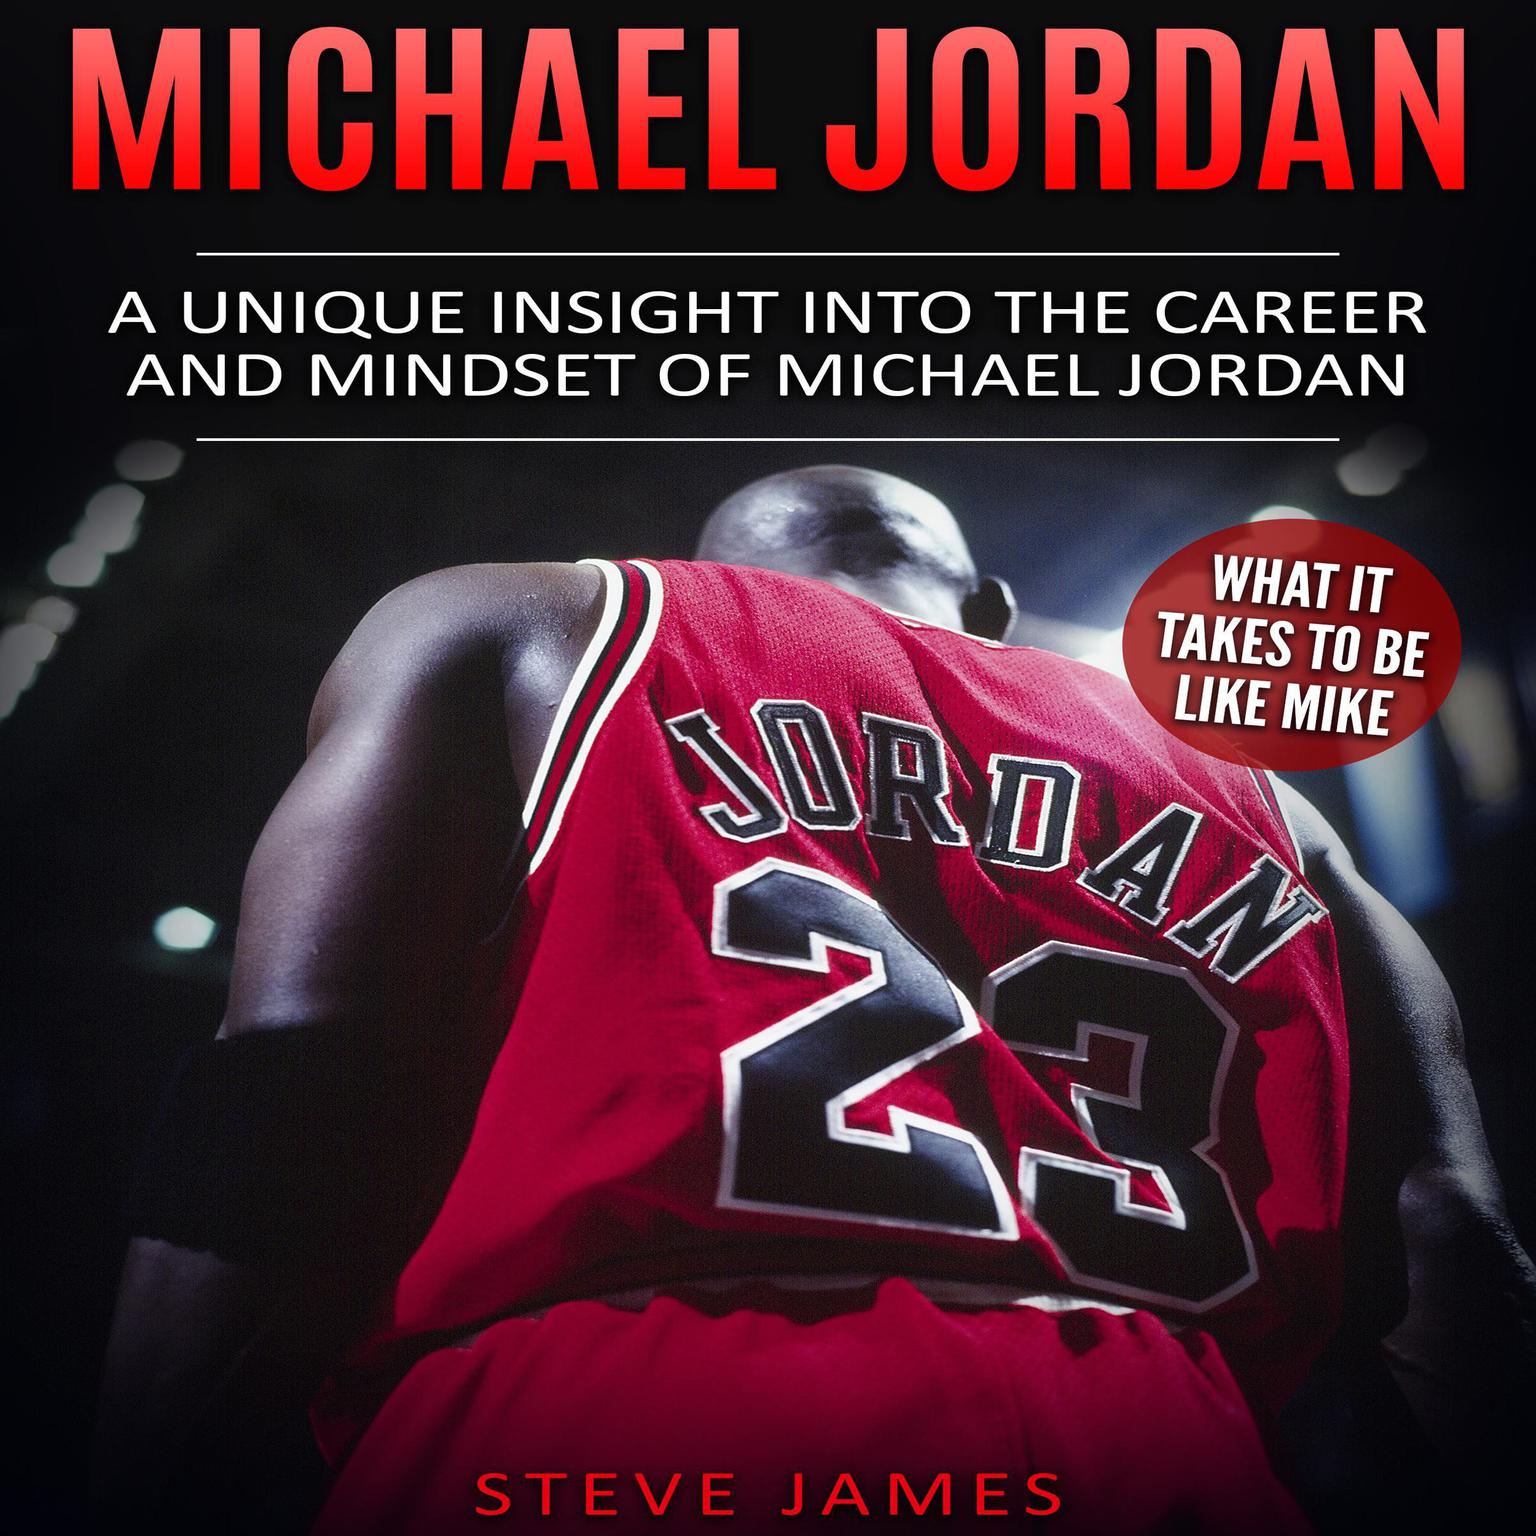 Michael Jordan: A Unique Insight into the Career and Mindset of Michael Jordan (What it Takes to Be Like Mike) Audiobook, by Steve James